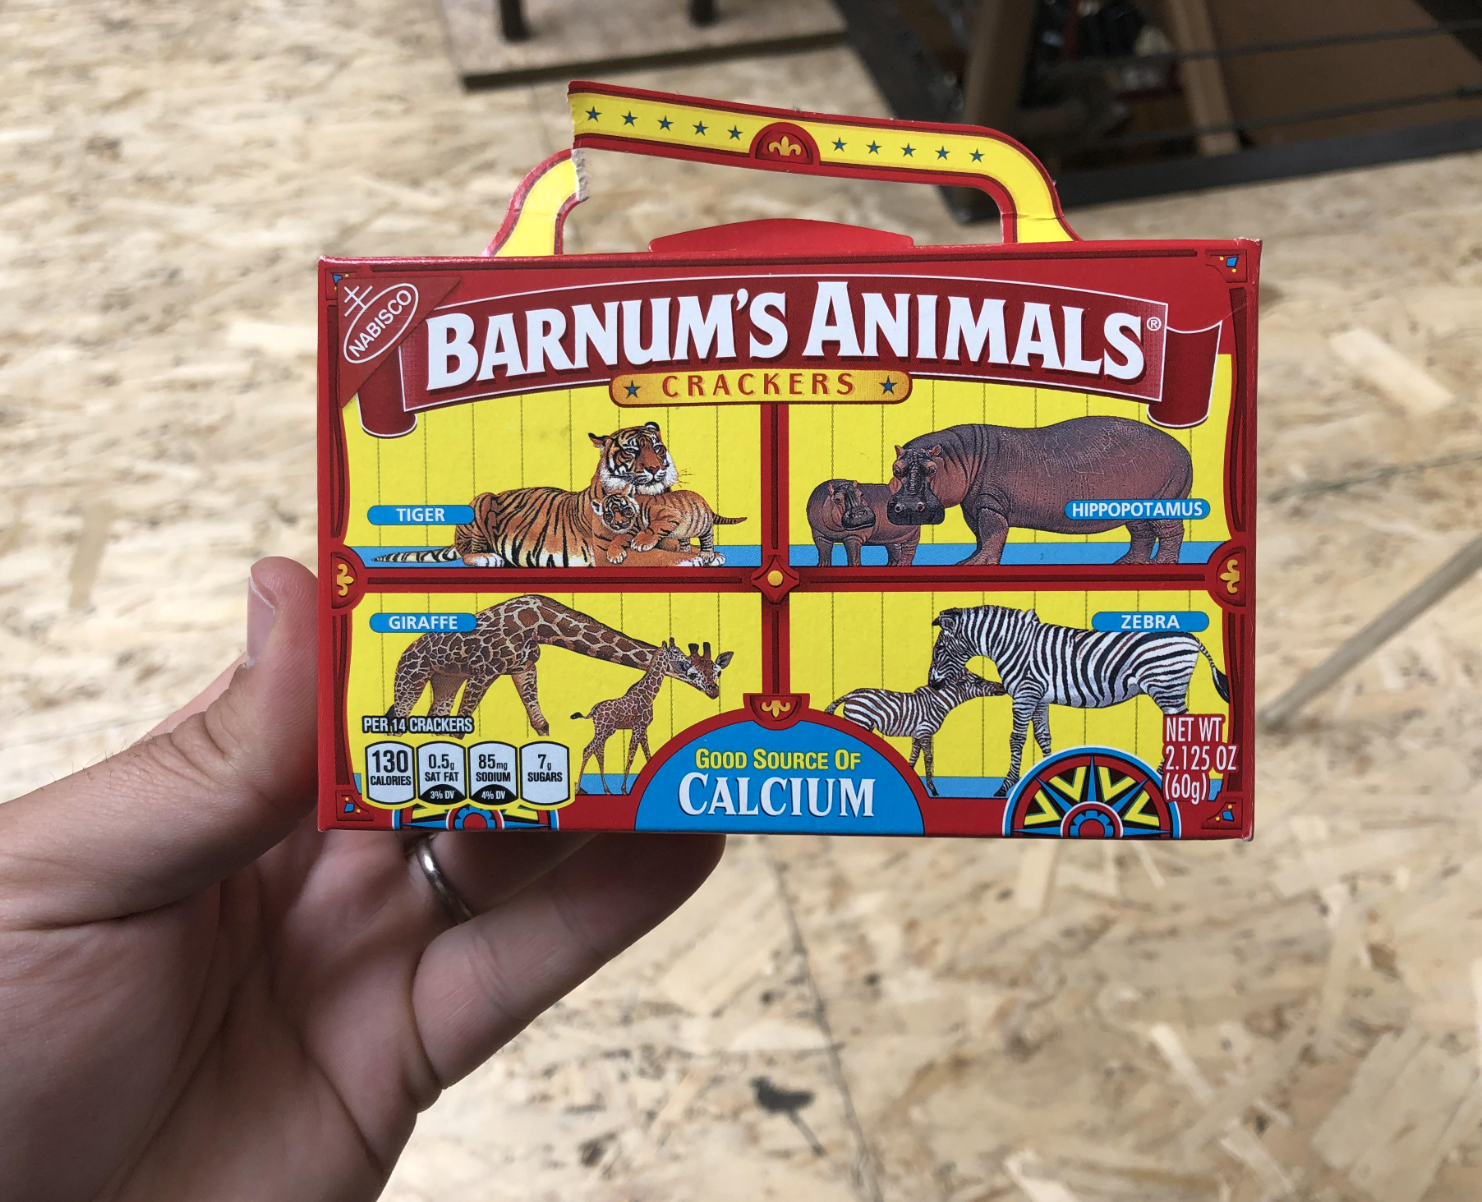 A box of animal crackers